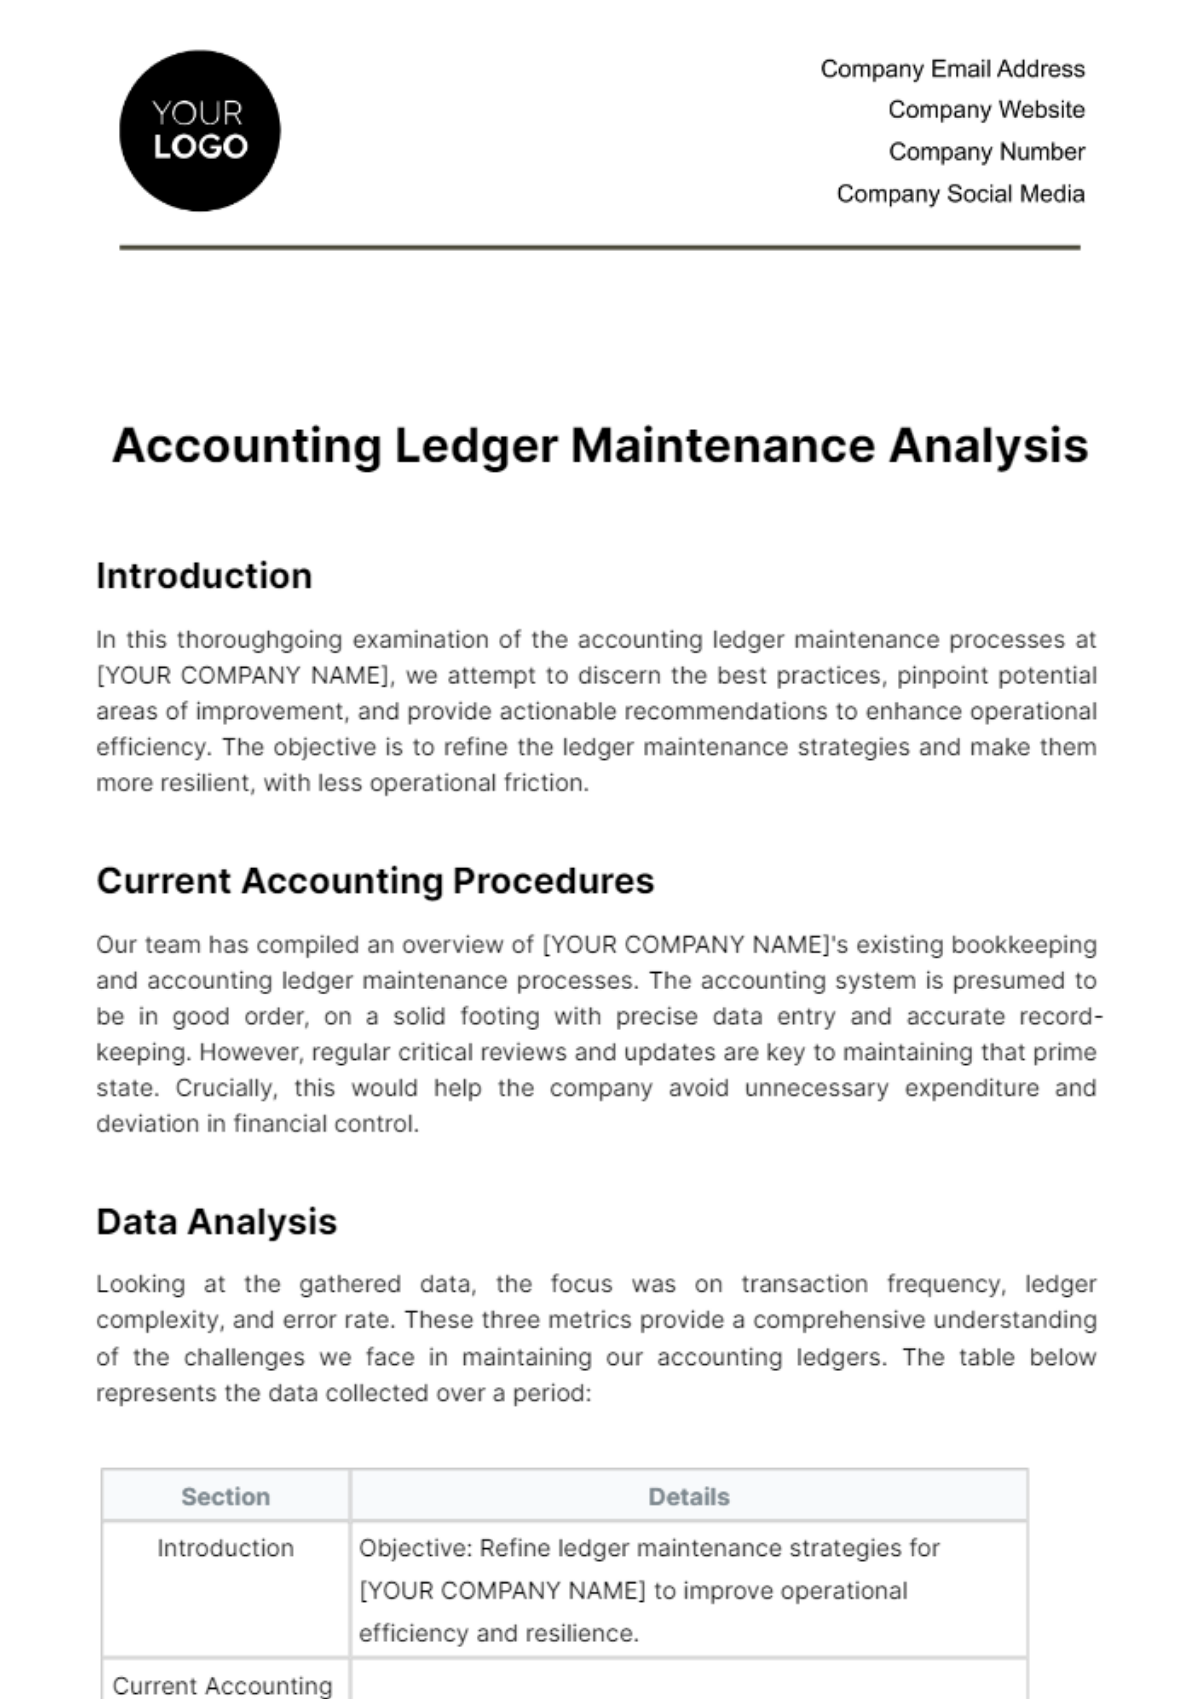 Accounting Ledger Maintenance Analysis Template